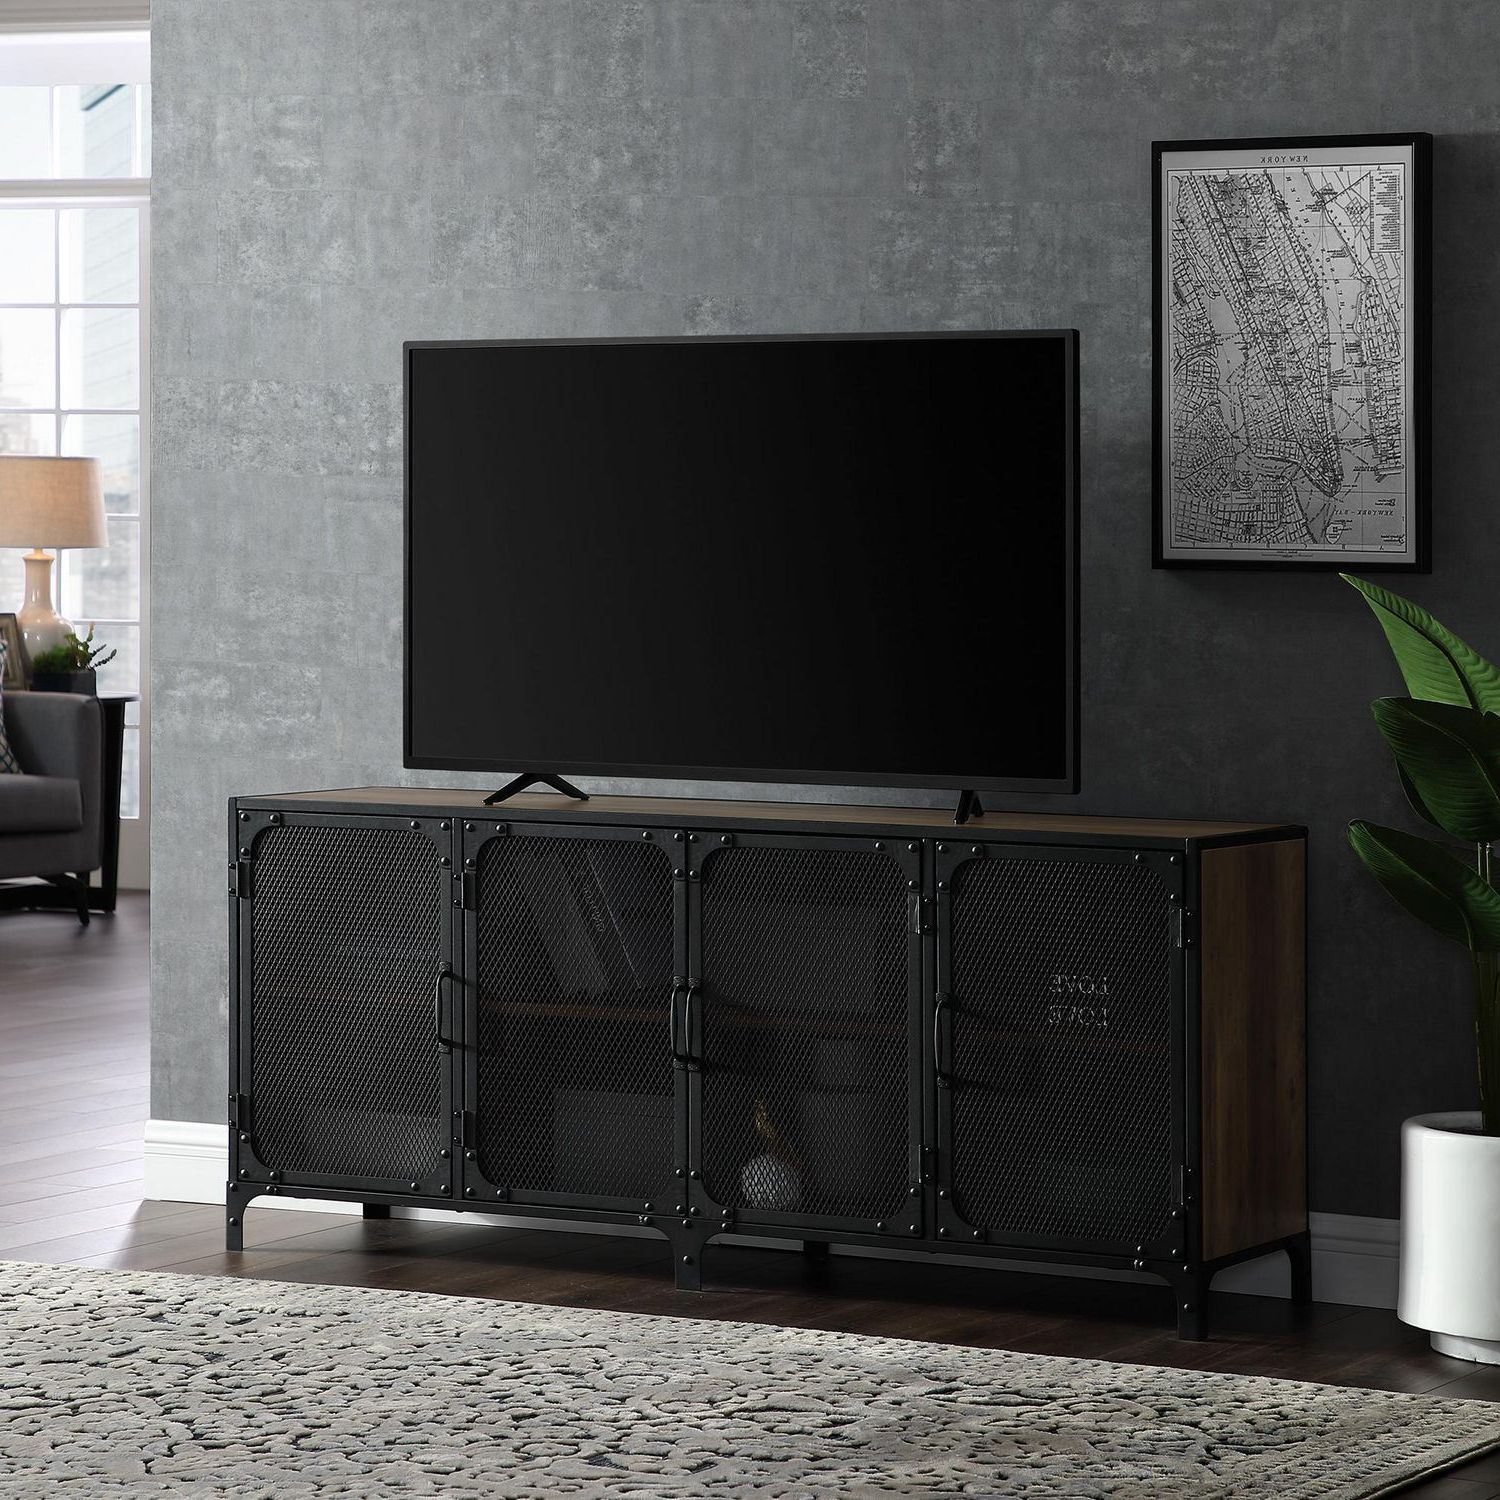 Manor Park Industrial Mesh Tv Stand For Tv's Up To 66 Throughout Urban Rustic Tv Stands (Gallery 3 of 20)